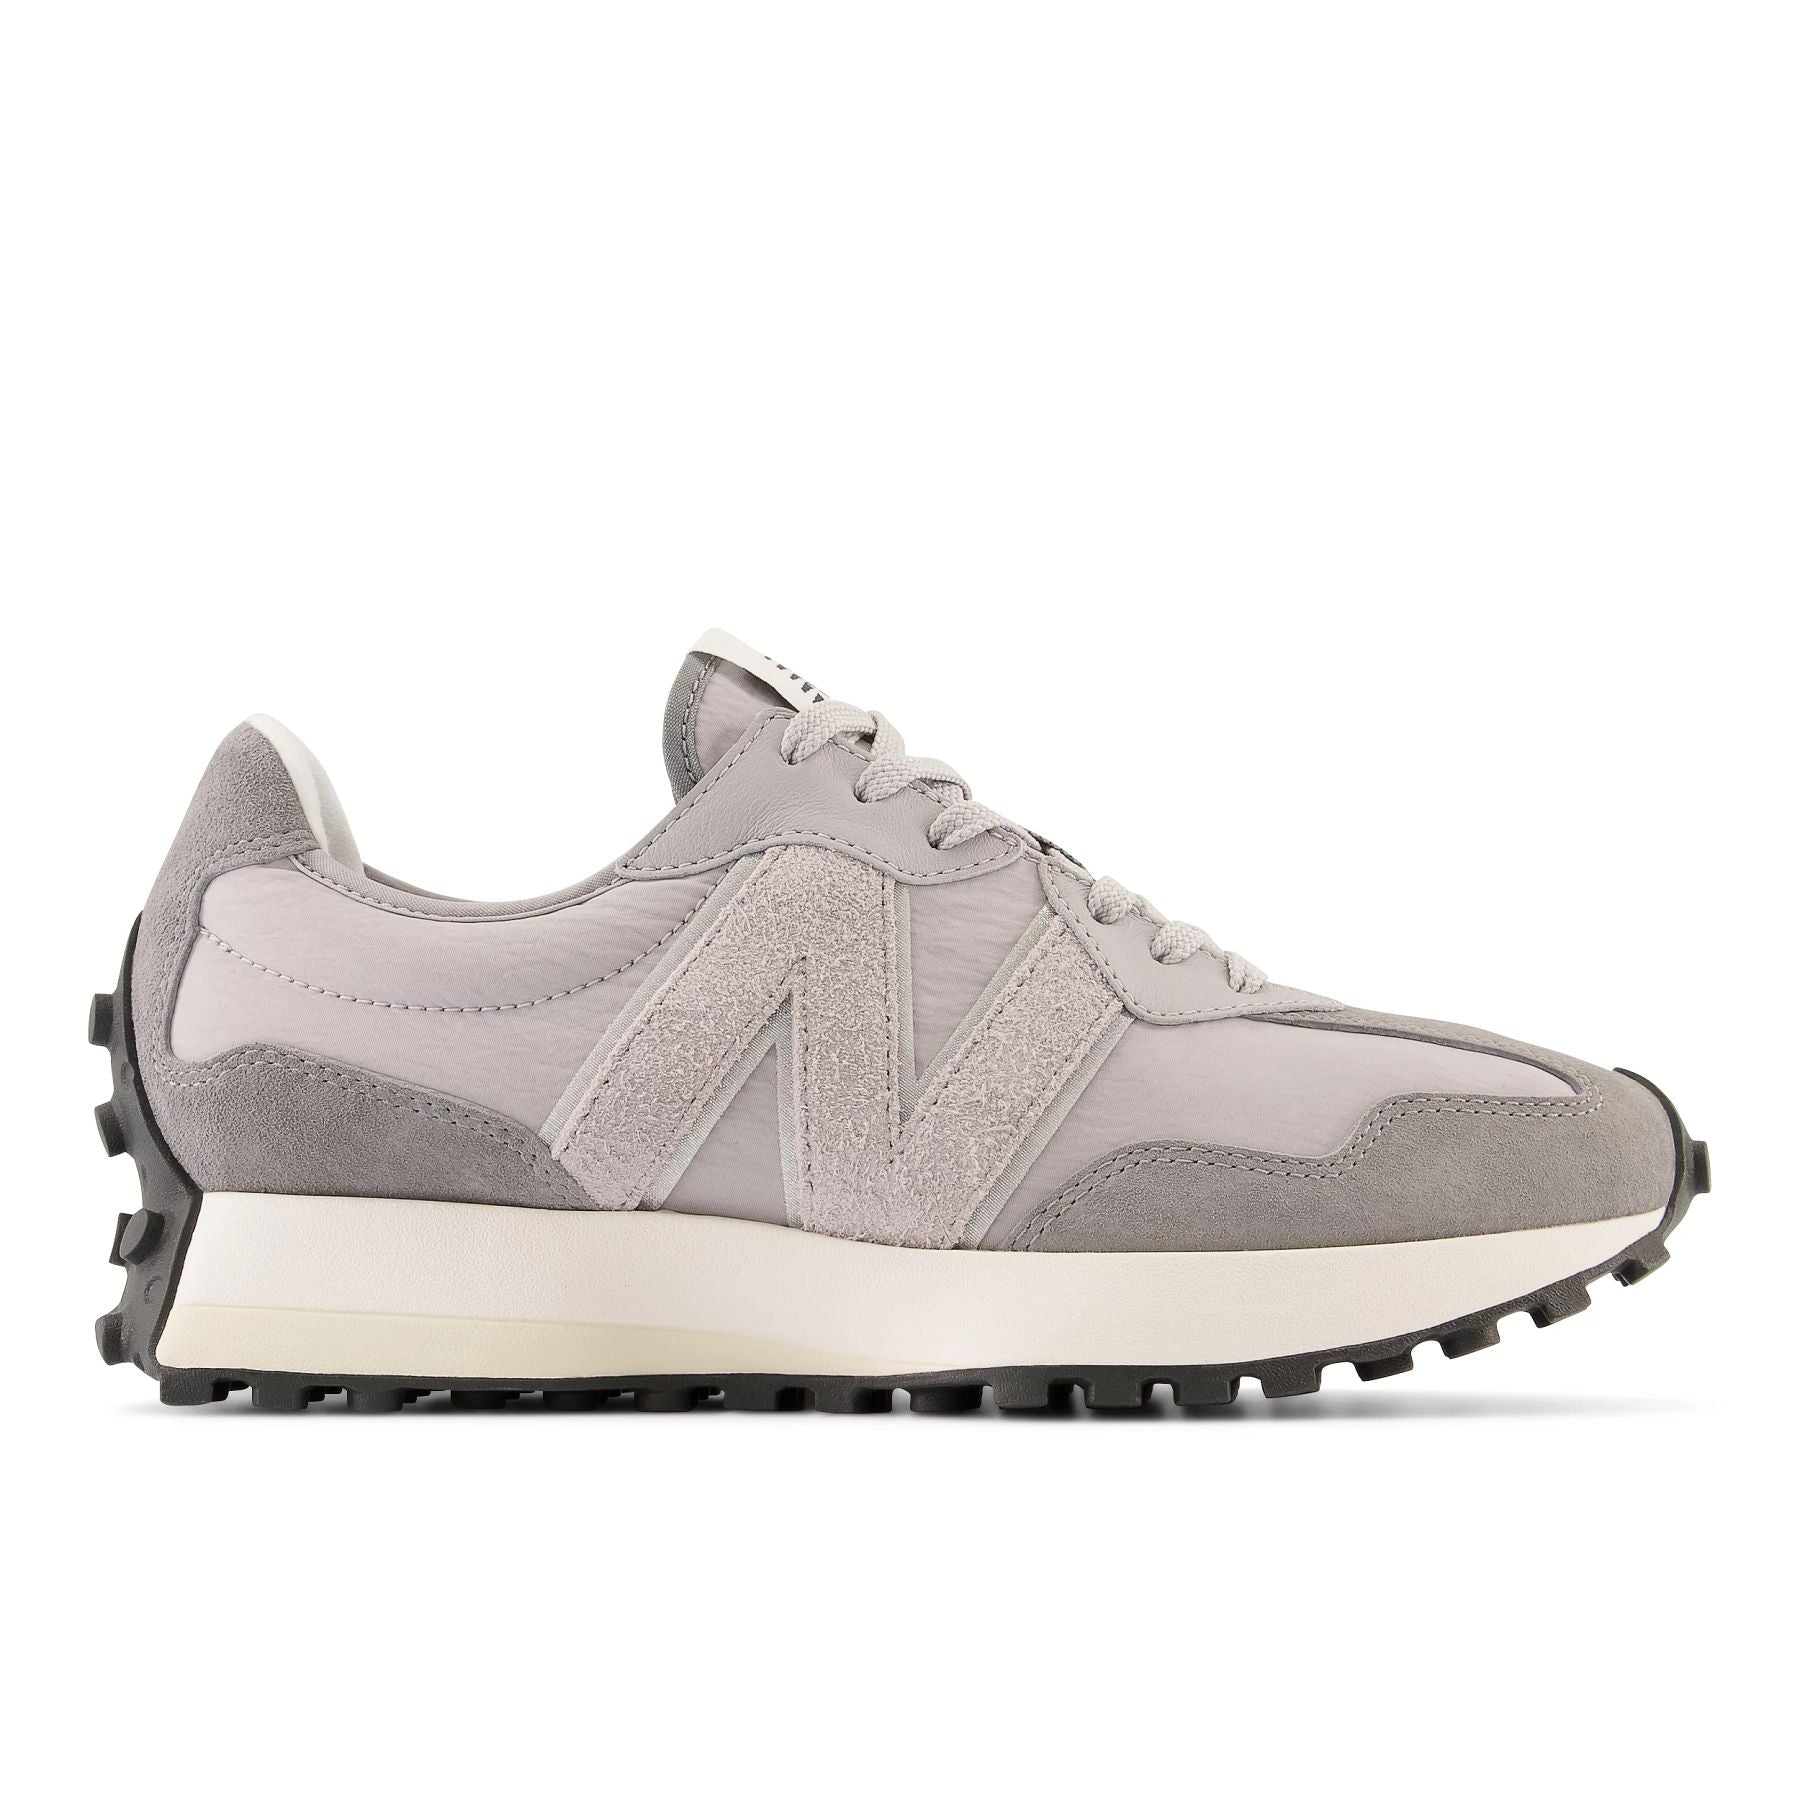 Lateral view of the Women's 327 in Grey/Rain